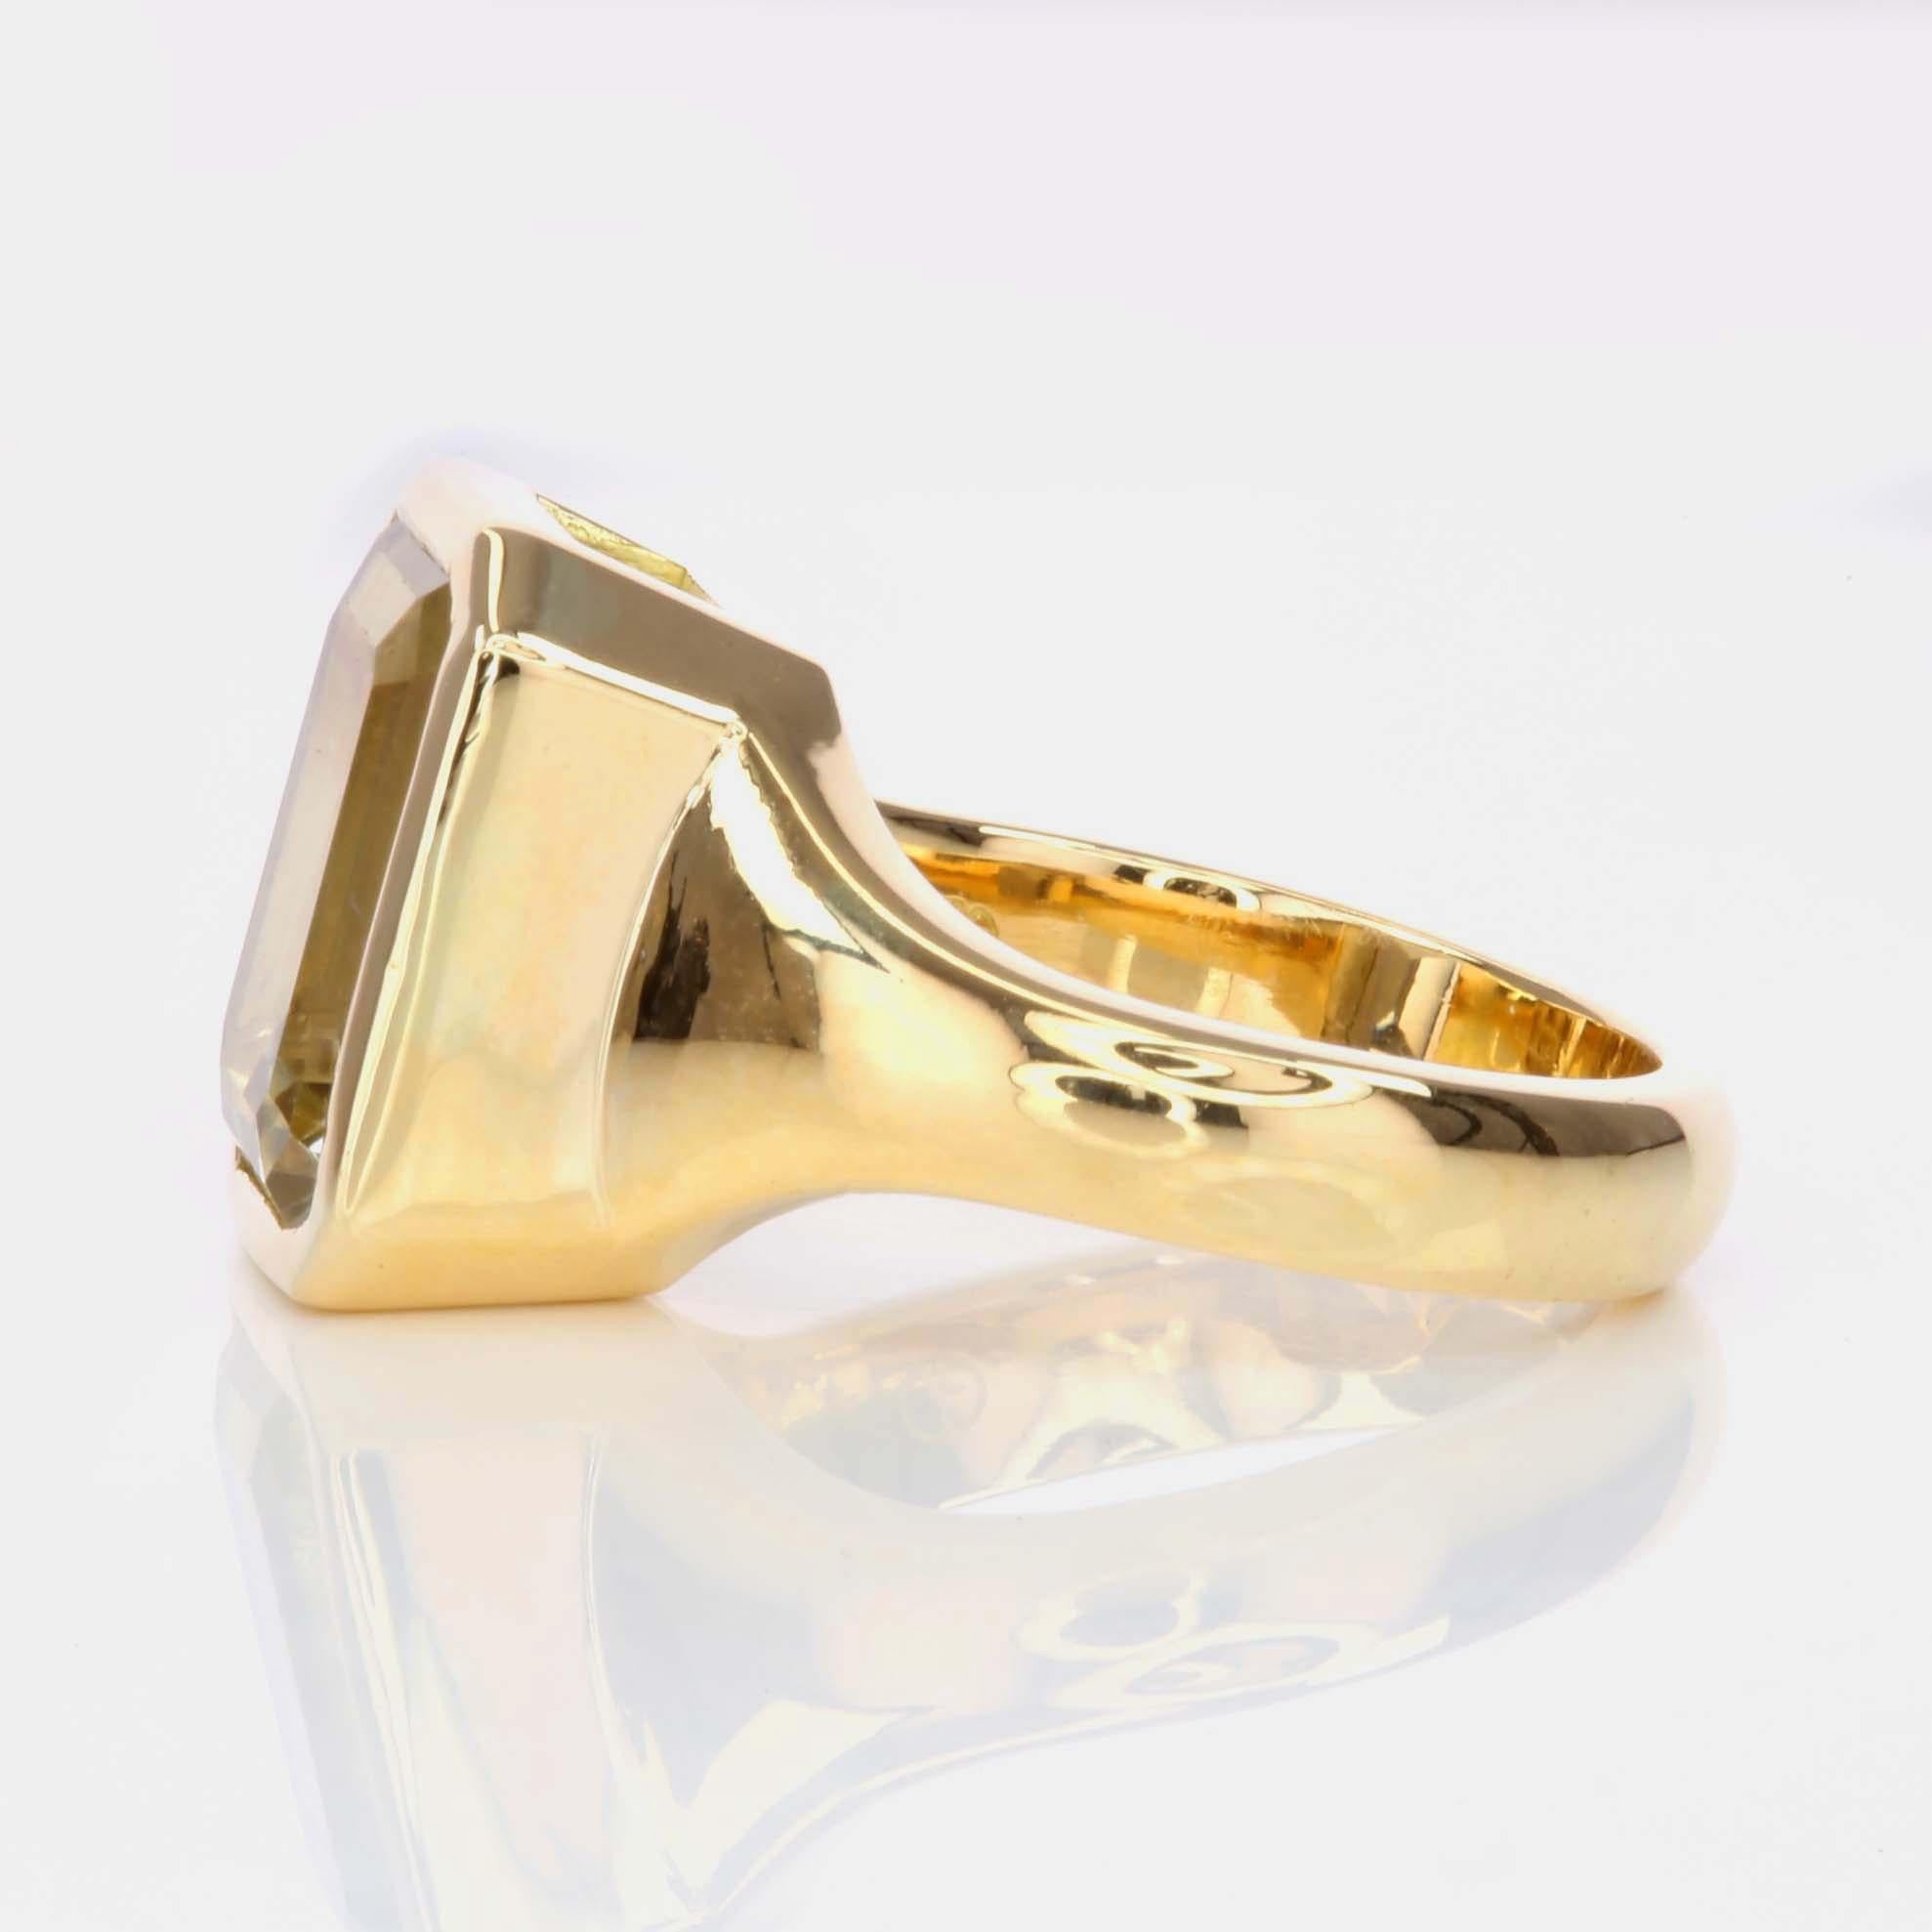 Modern 4.75ct Yellow Tourmaline Pinky Ring-Emerald Cut-18KT Gold-GIA Certified-Rare For Sale